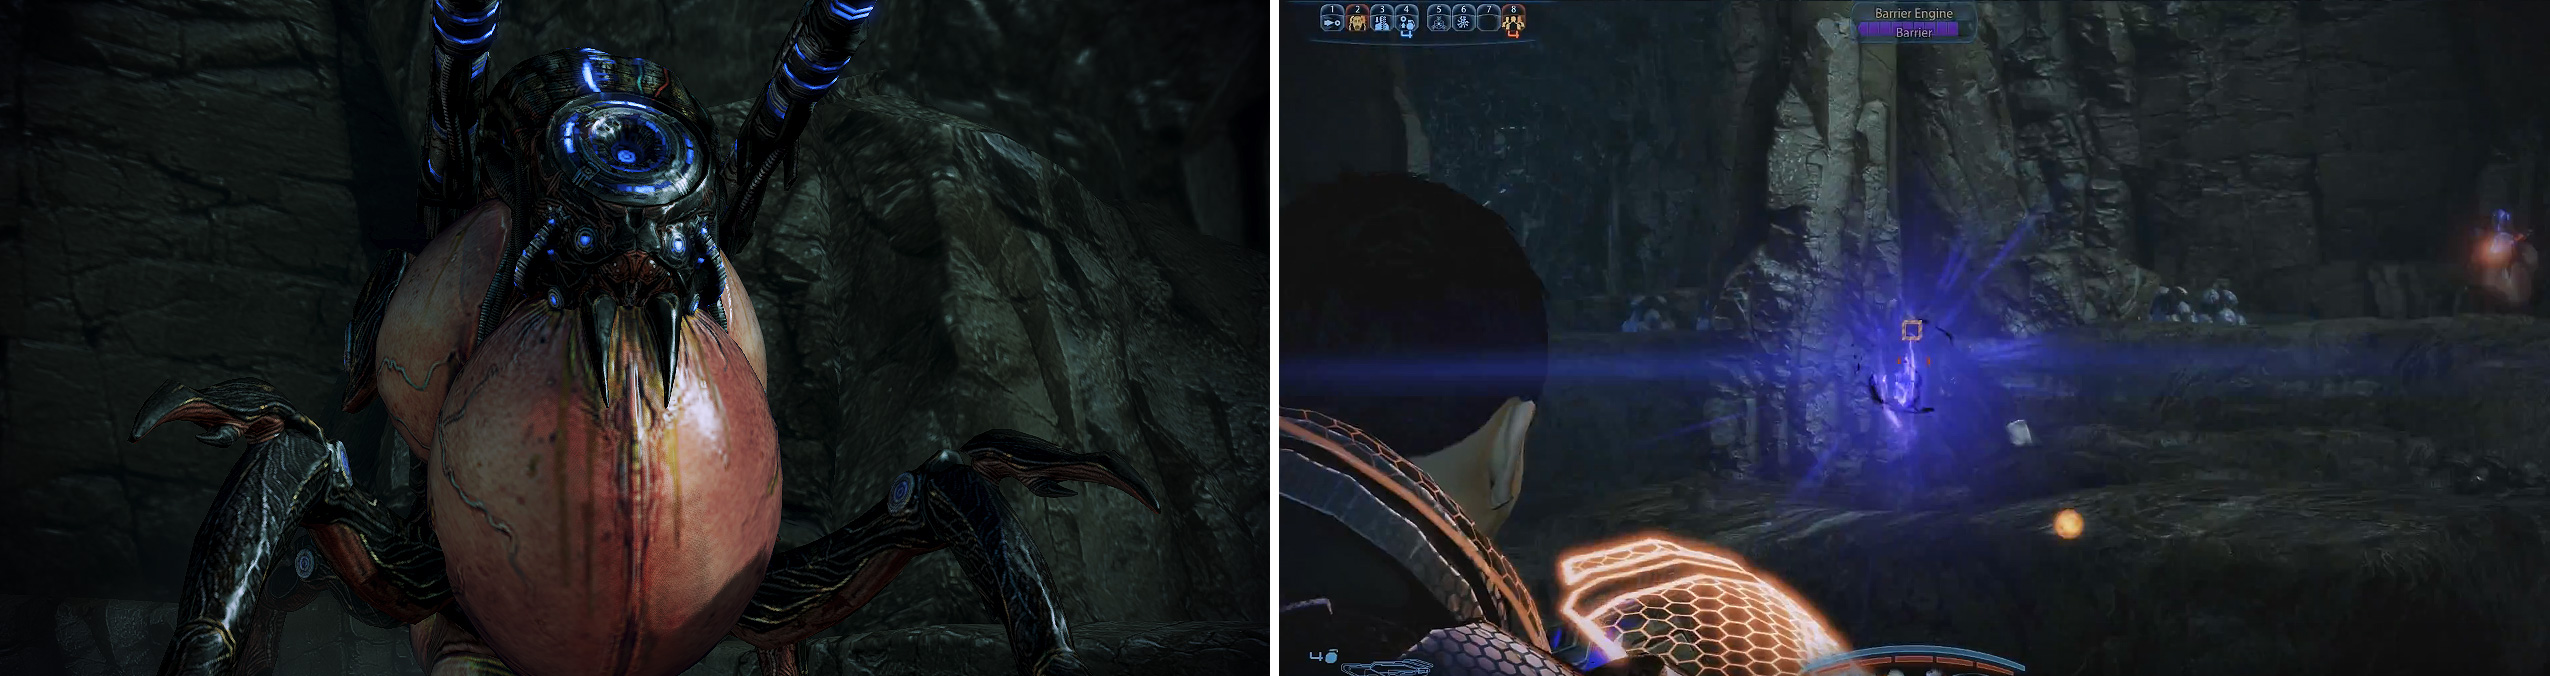 Ravagers shoot powerful lasers from their eye which will decimate shields in a hit or two (left). Look out for Barrier Nodes (right) and remove them quickly.